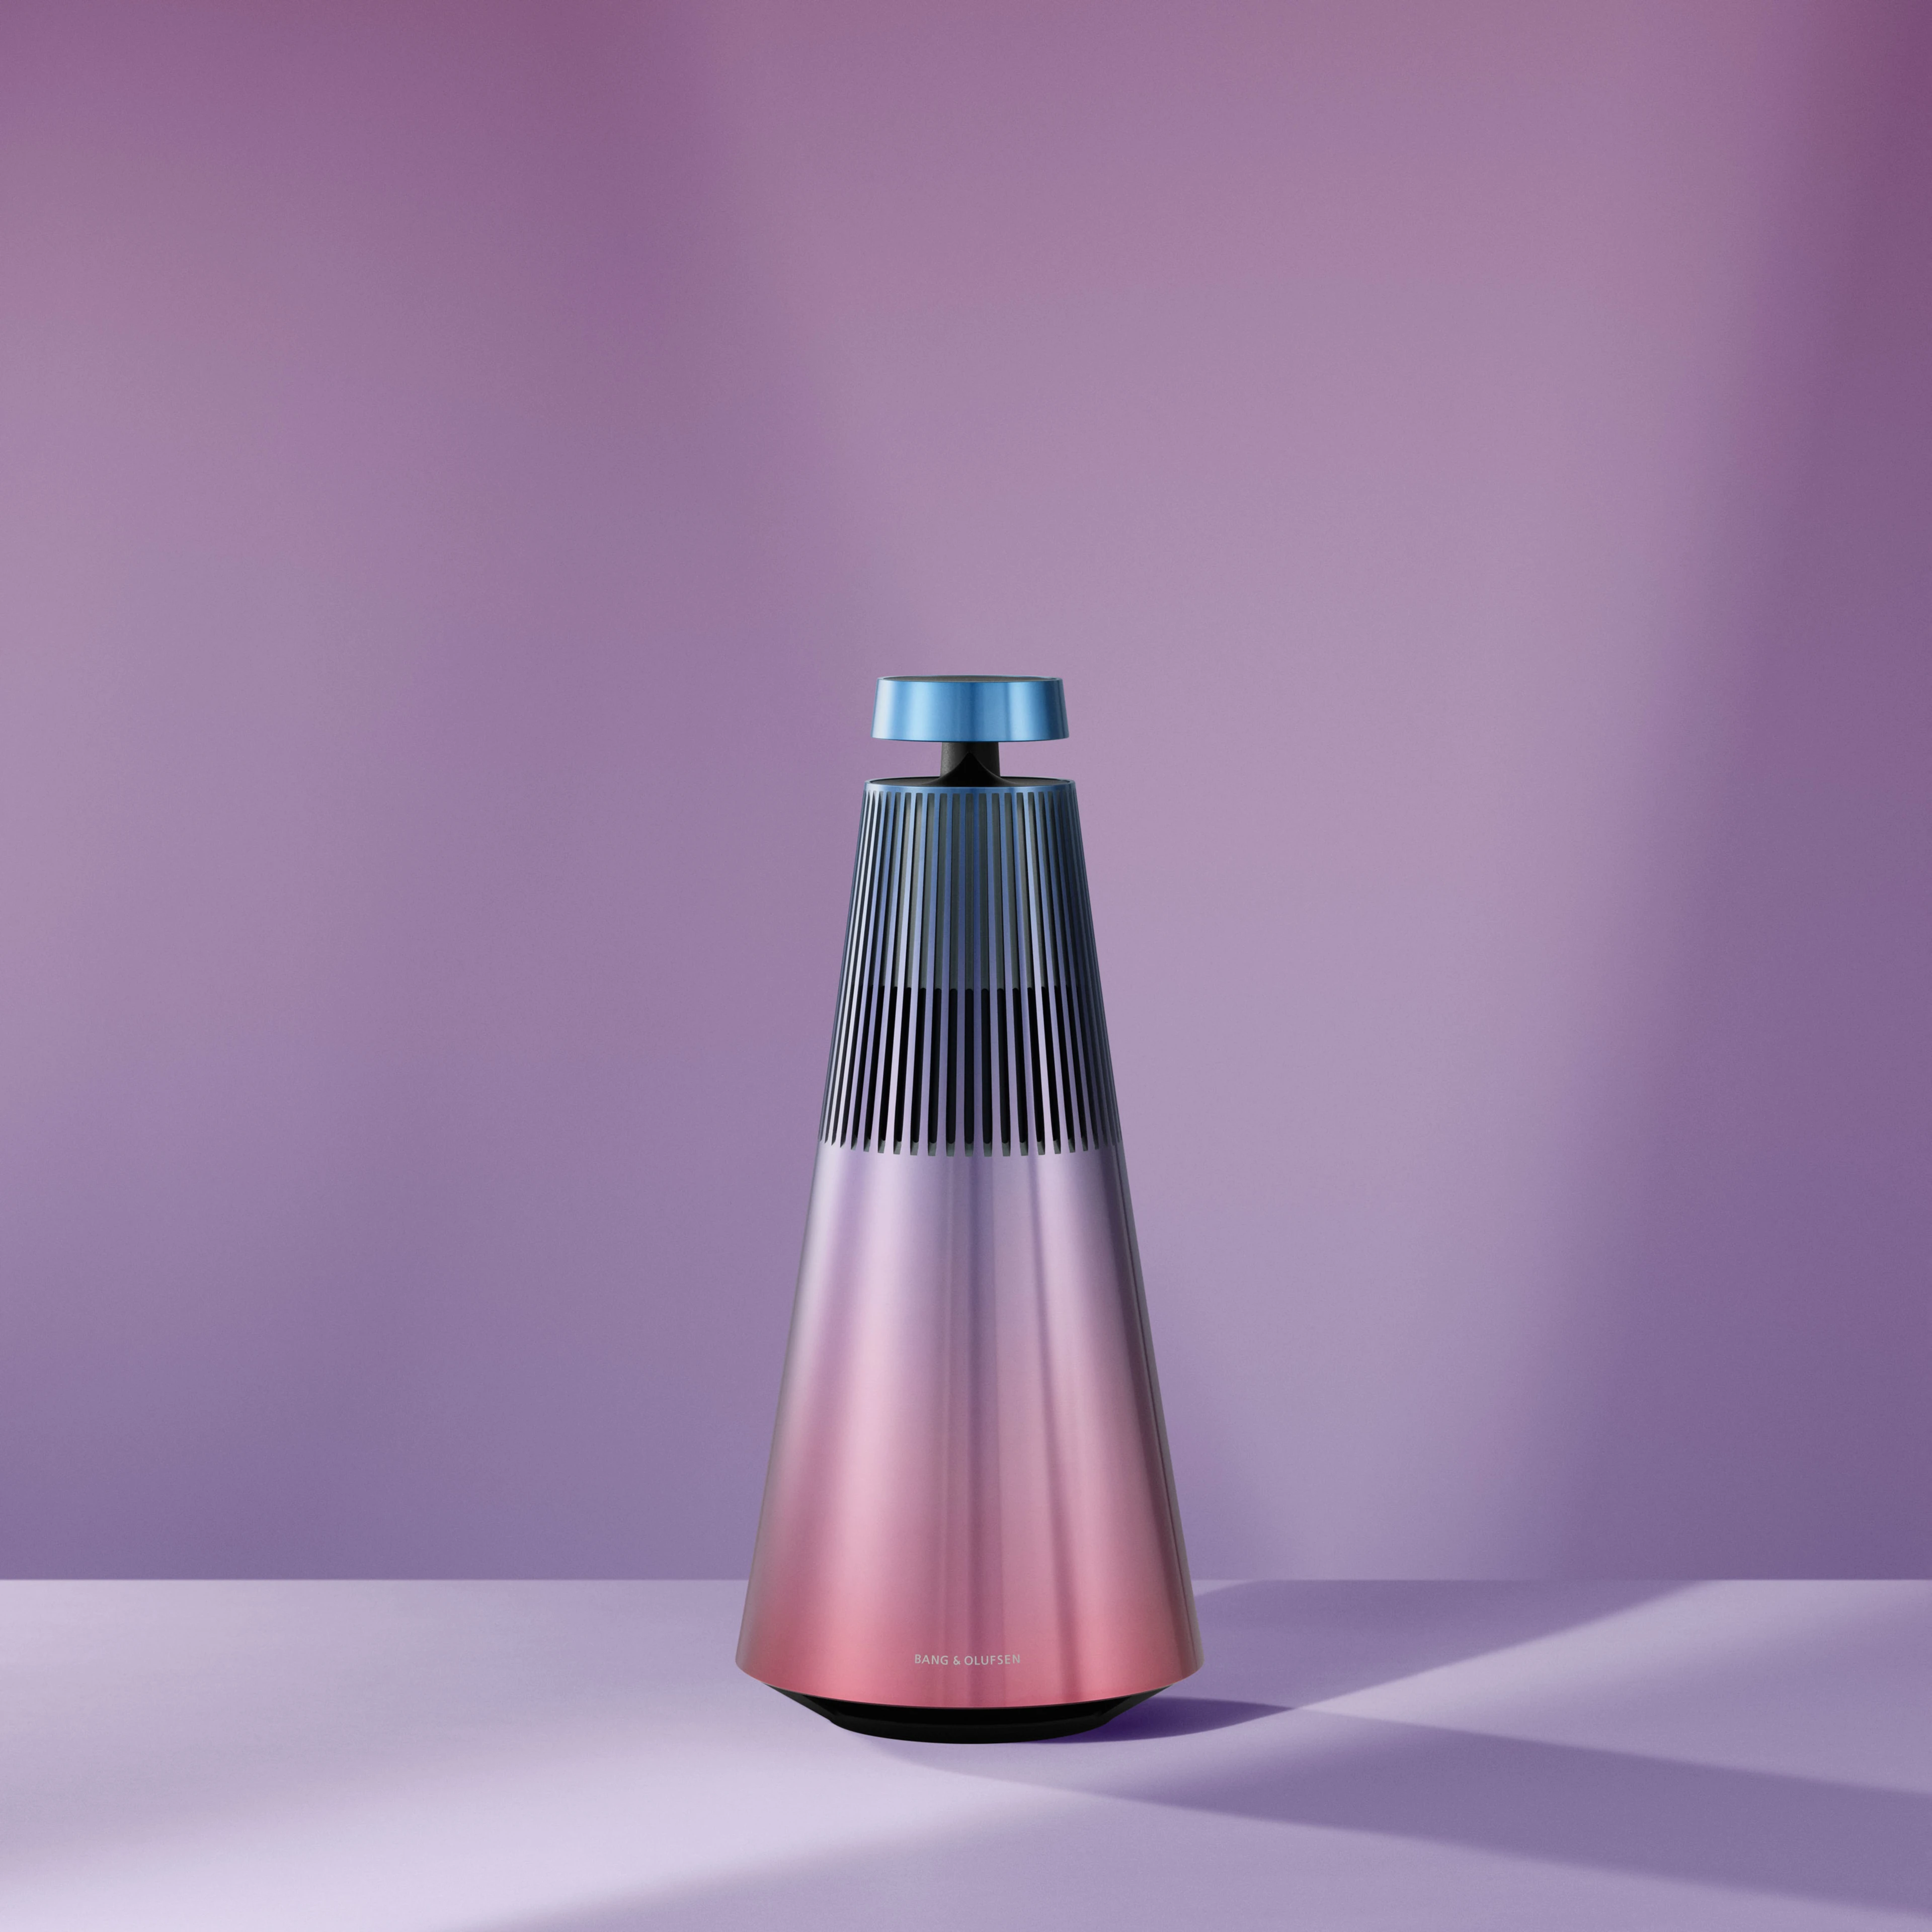 Image of Beosound 2 Atelier Limited Editions speaker in the colour Daybreak Blossom which is a gradient colour of pink, blue and purple